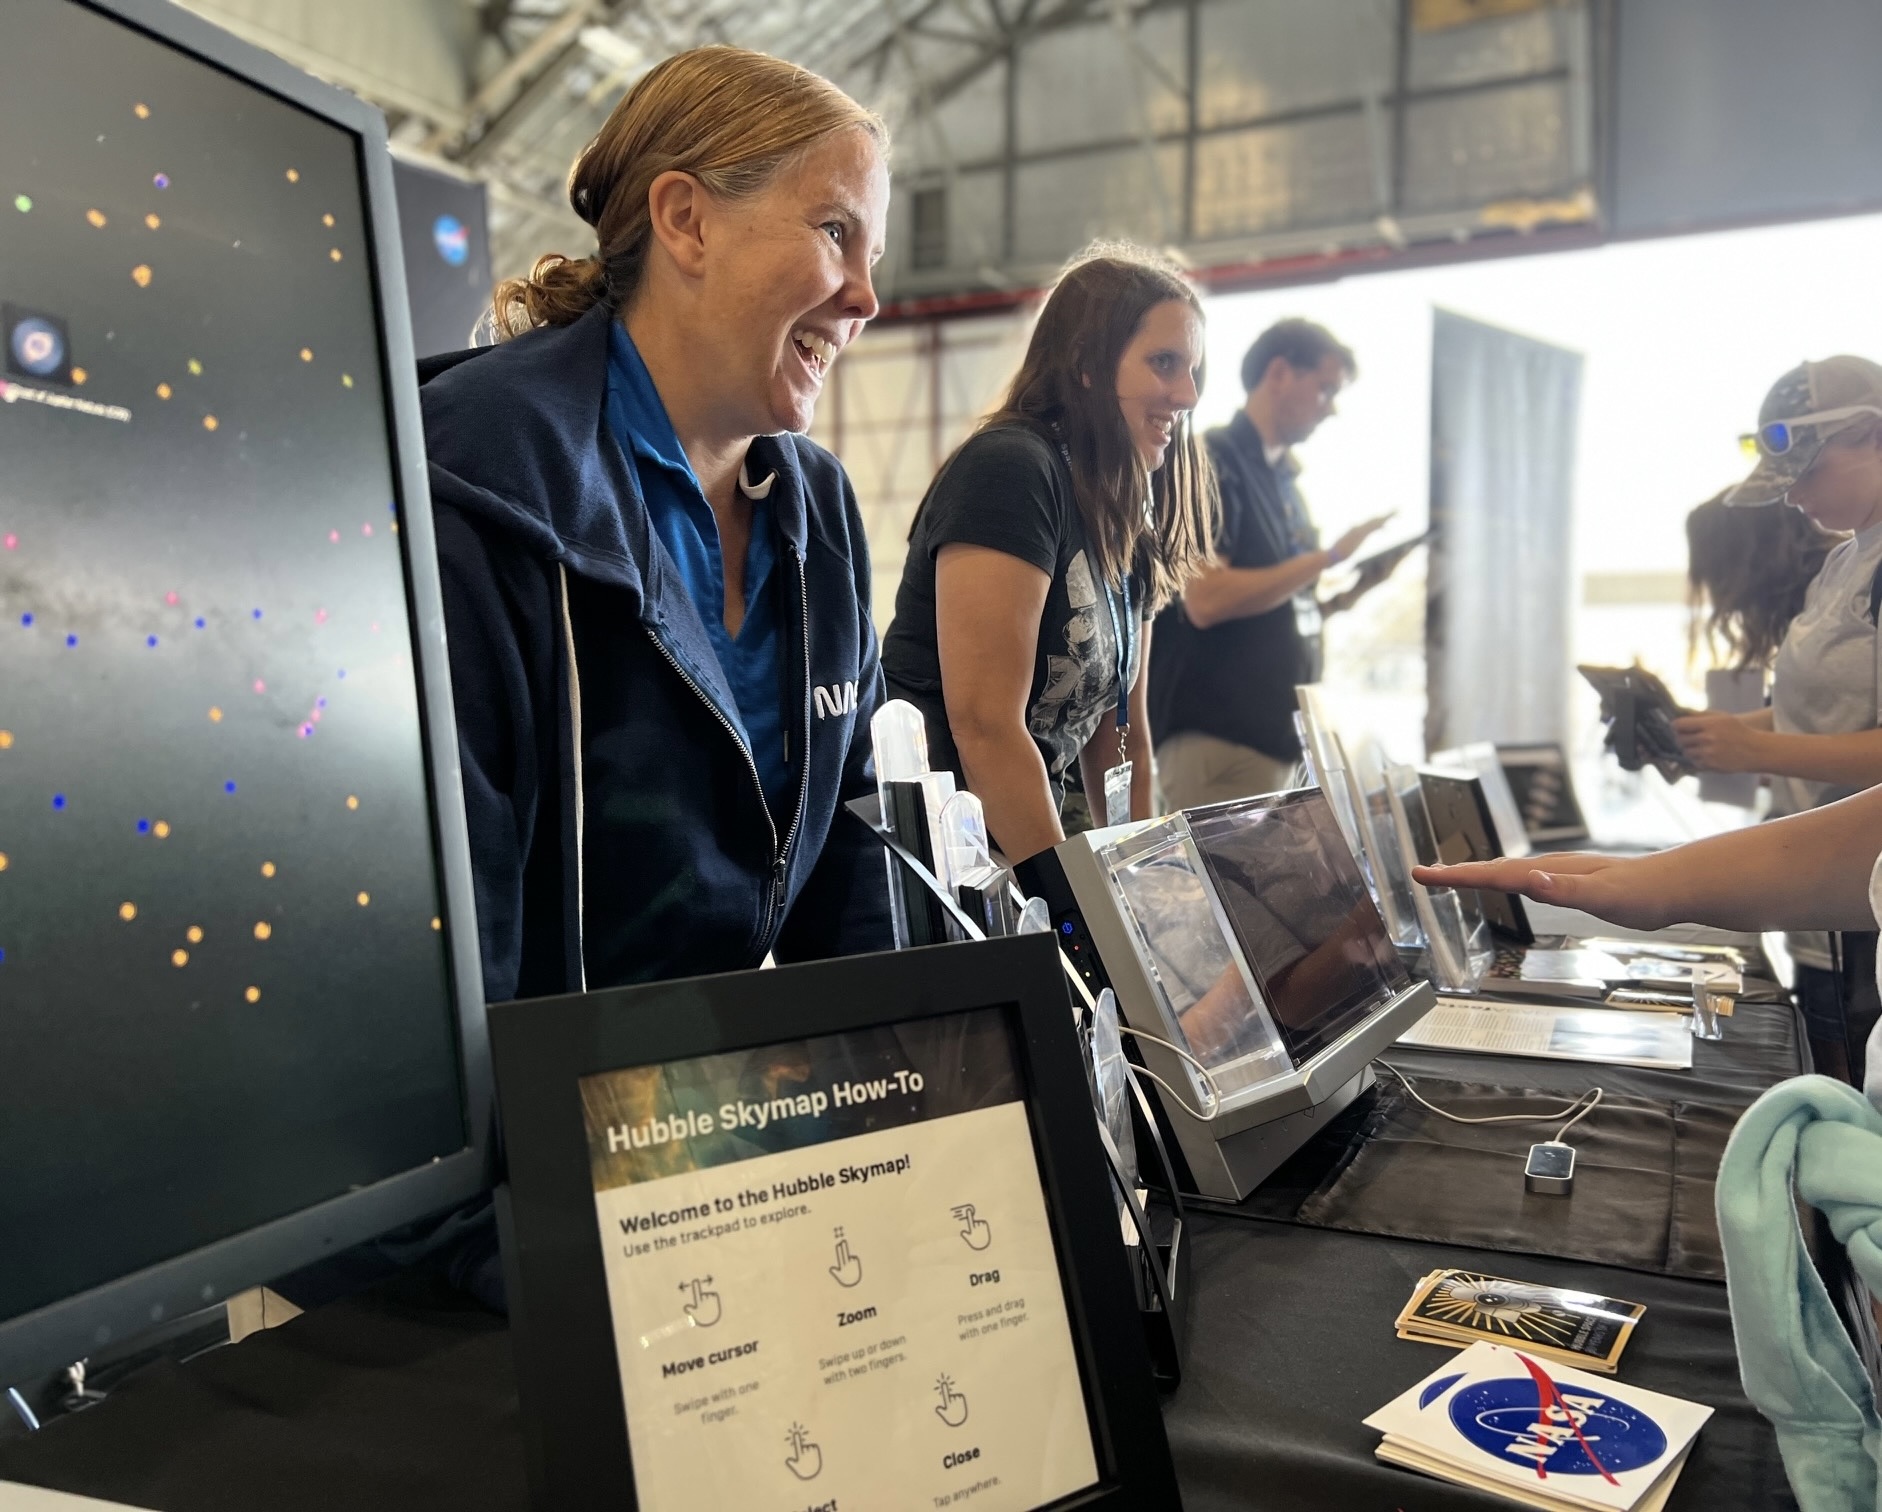 Two women and a man standing at a table with a computer monitor and a digital interactive hubble space telescope speaking to people at an event.